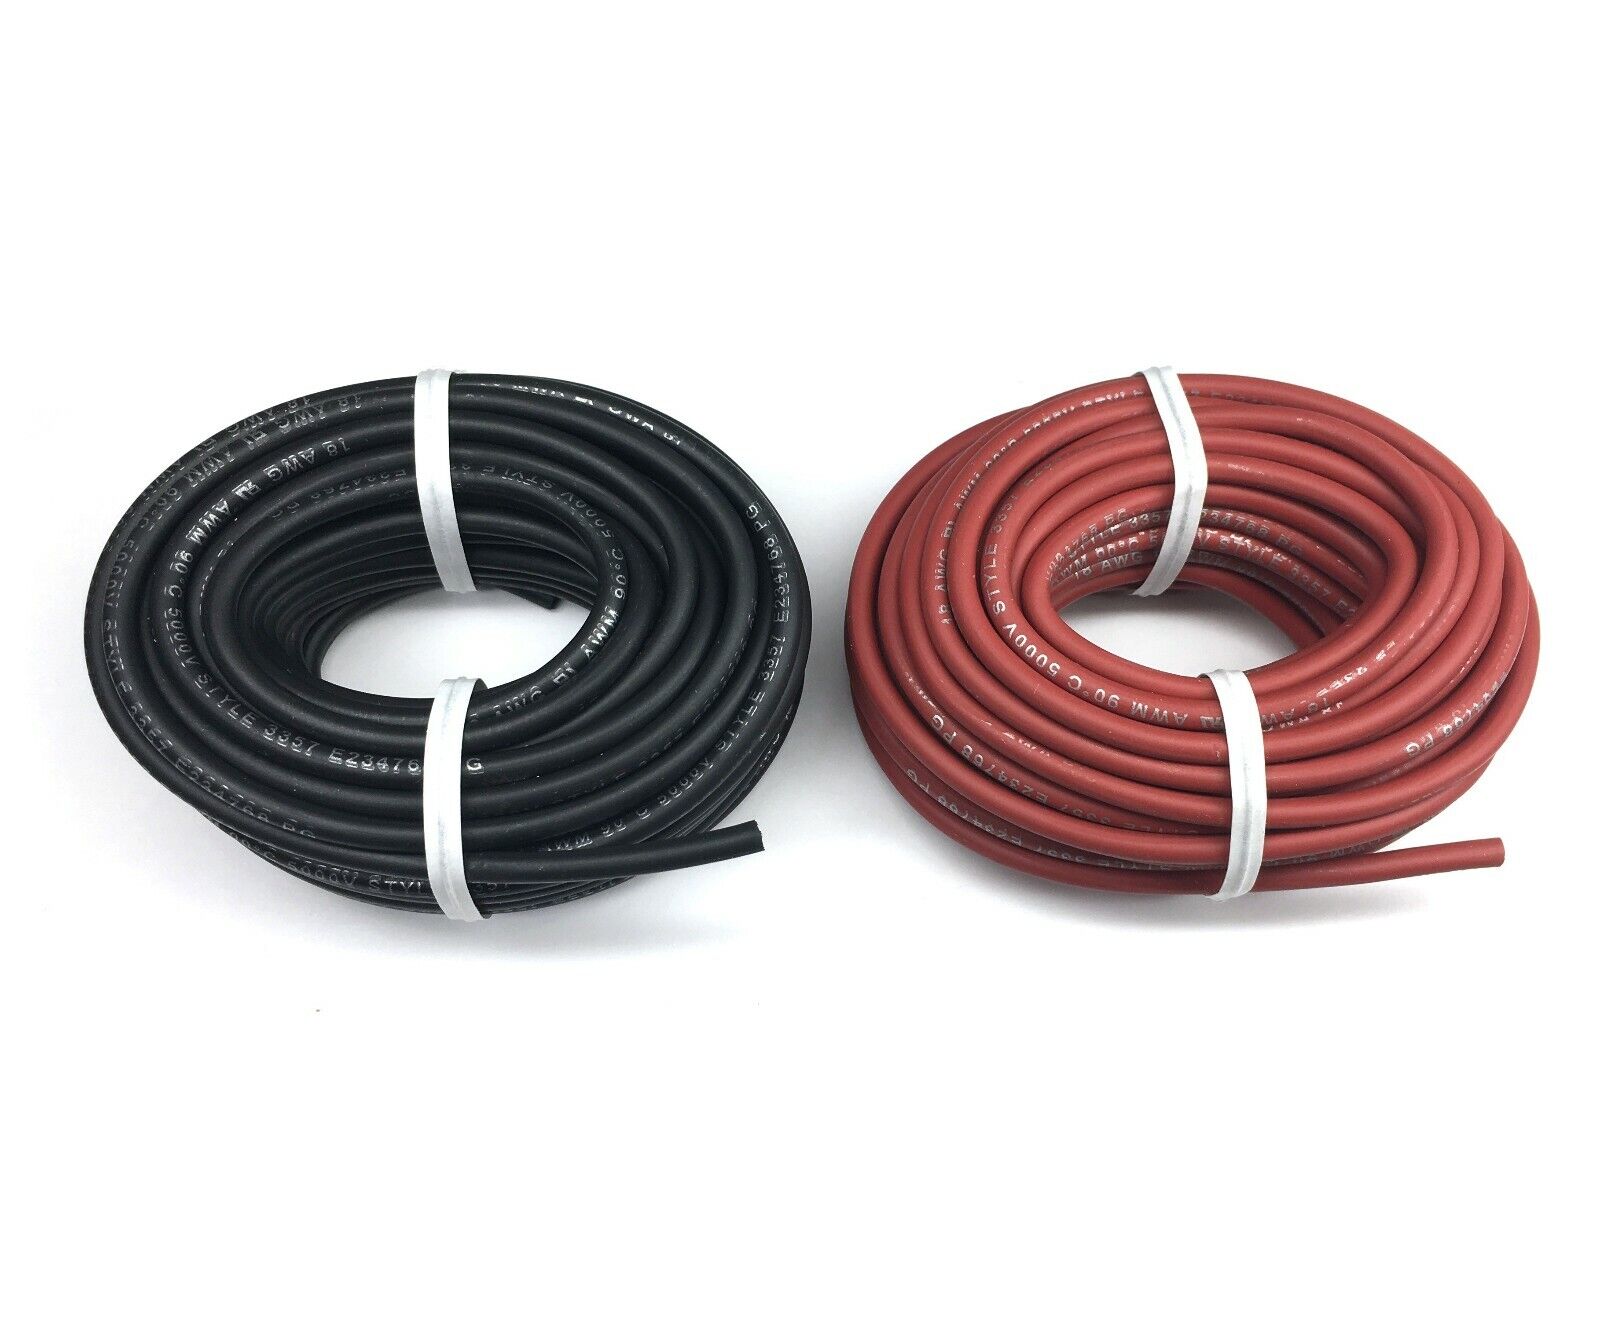 NEW 25 ft Black and 25 ft Red Flexible High Voltage 18 AWG Test Lead Probe Wire Philmore 472/476